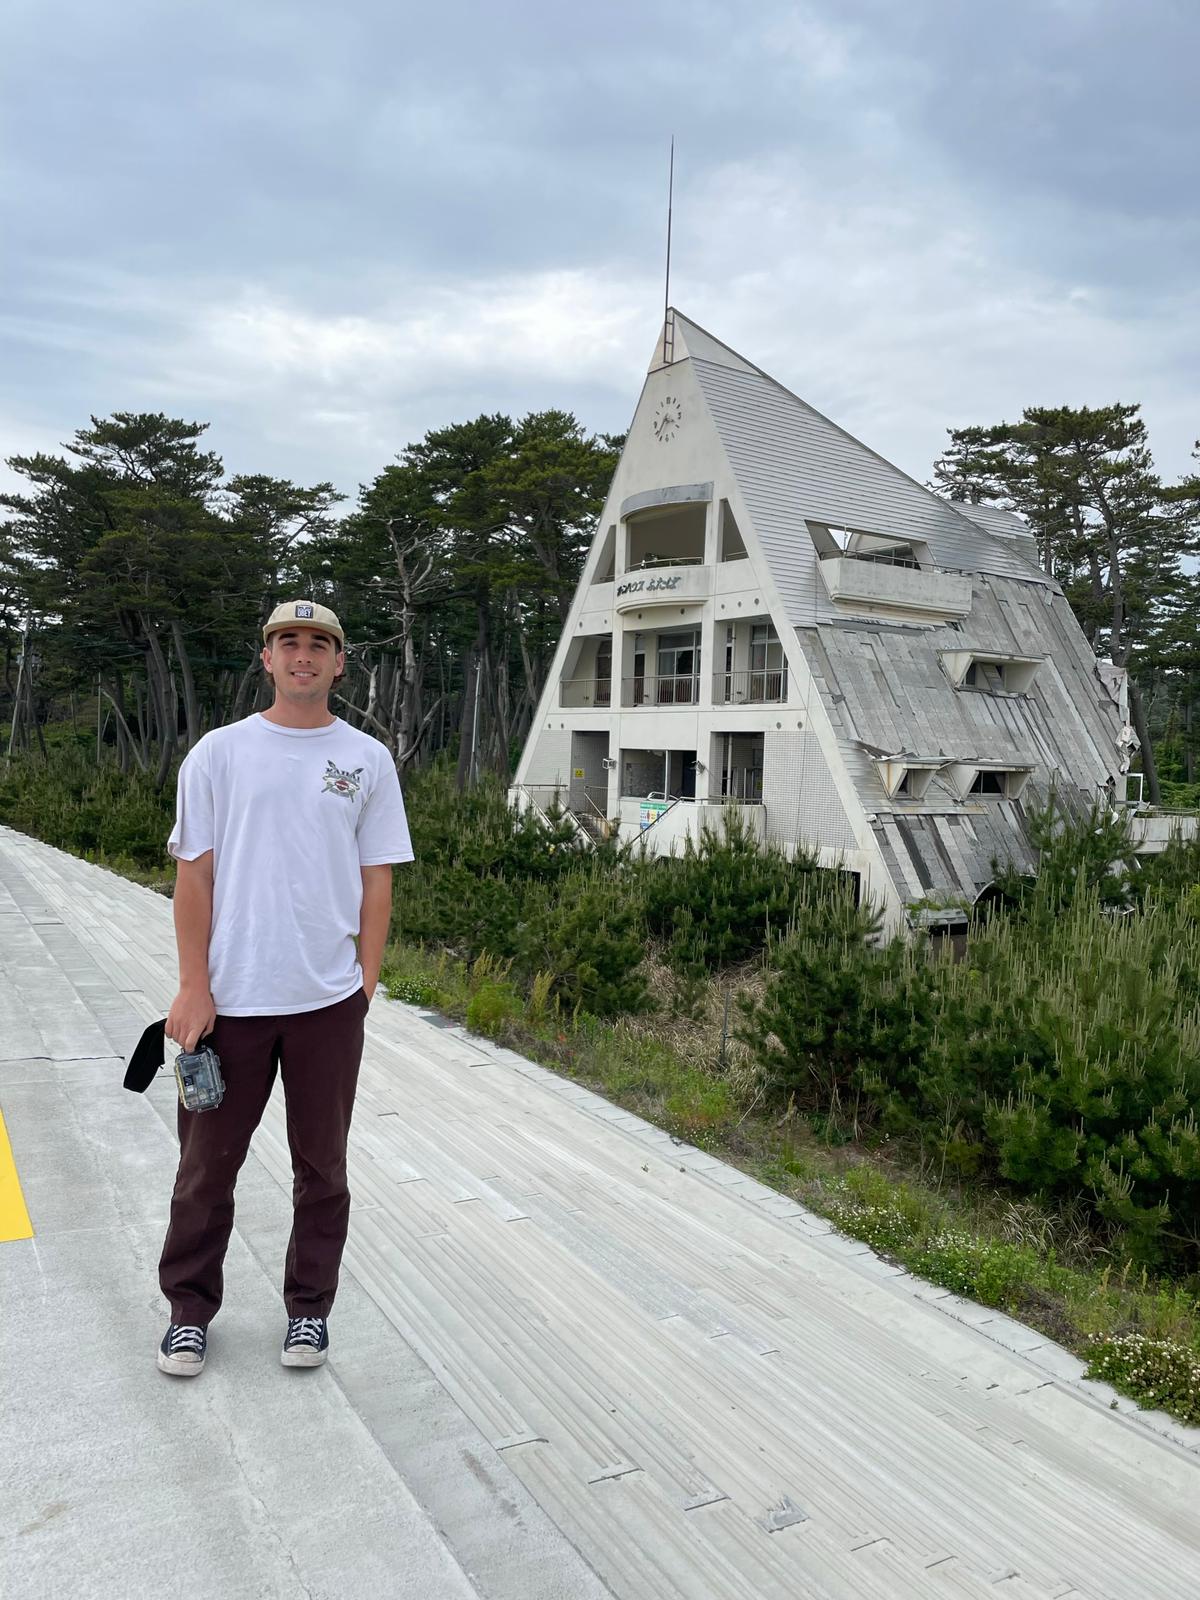 The author standing with a bGeigie on the new seawall in Futaba. Behind me is the destroyed Marine House recreation facility. The tsunami wiped out the first two floors, but some people made it to the third floor and survived.